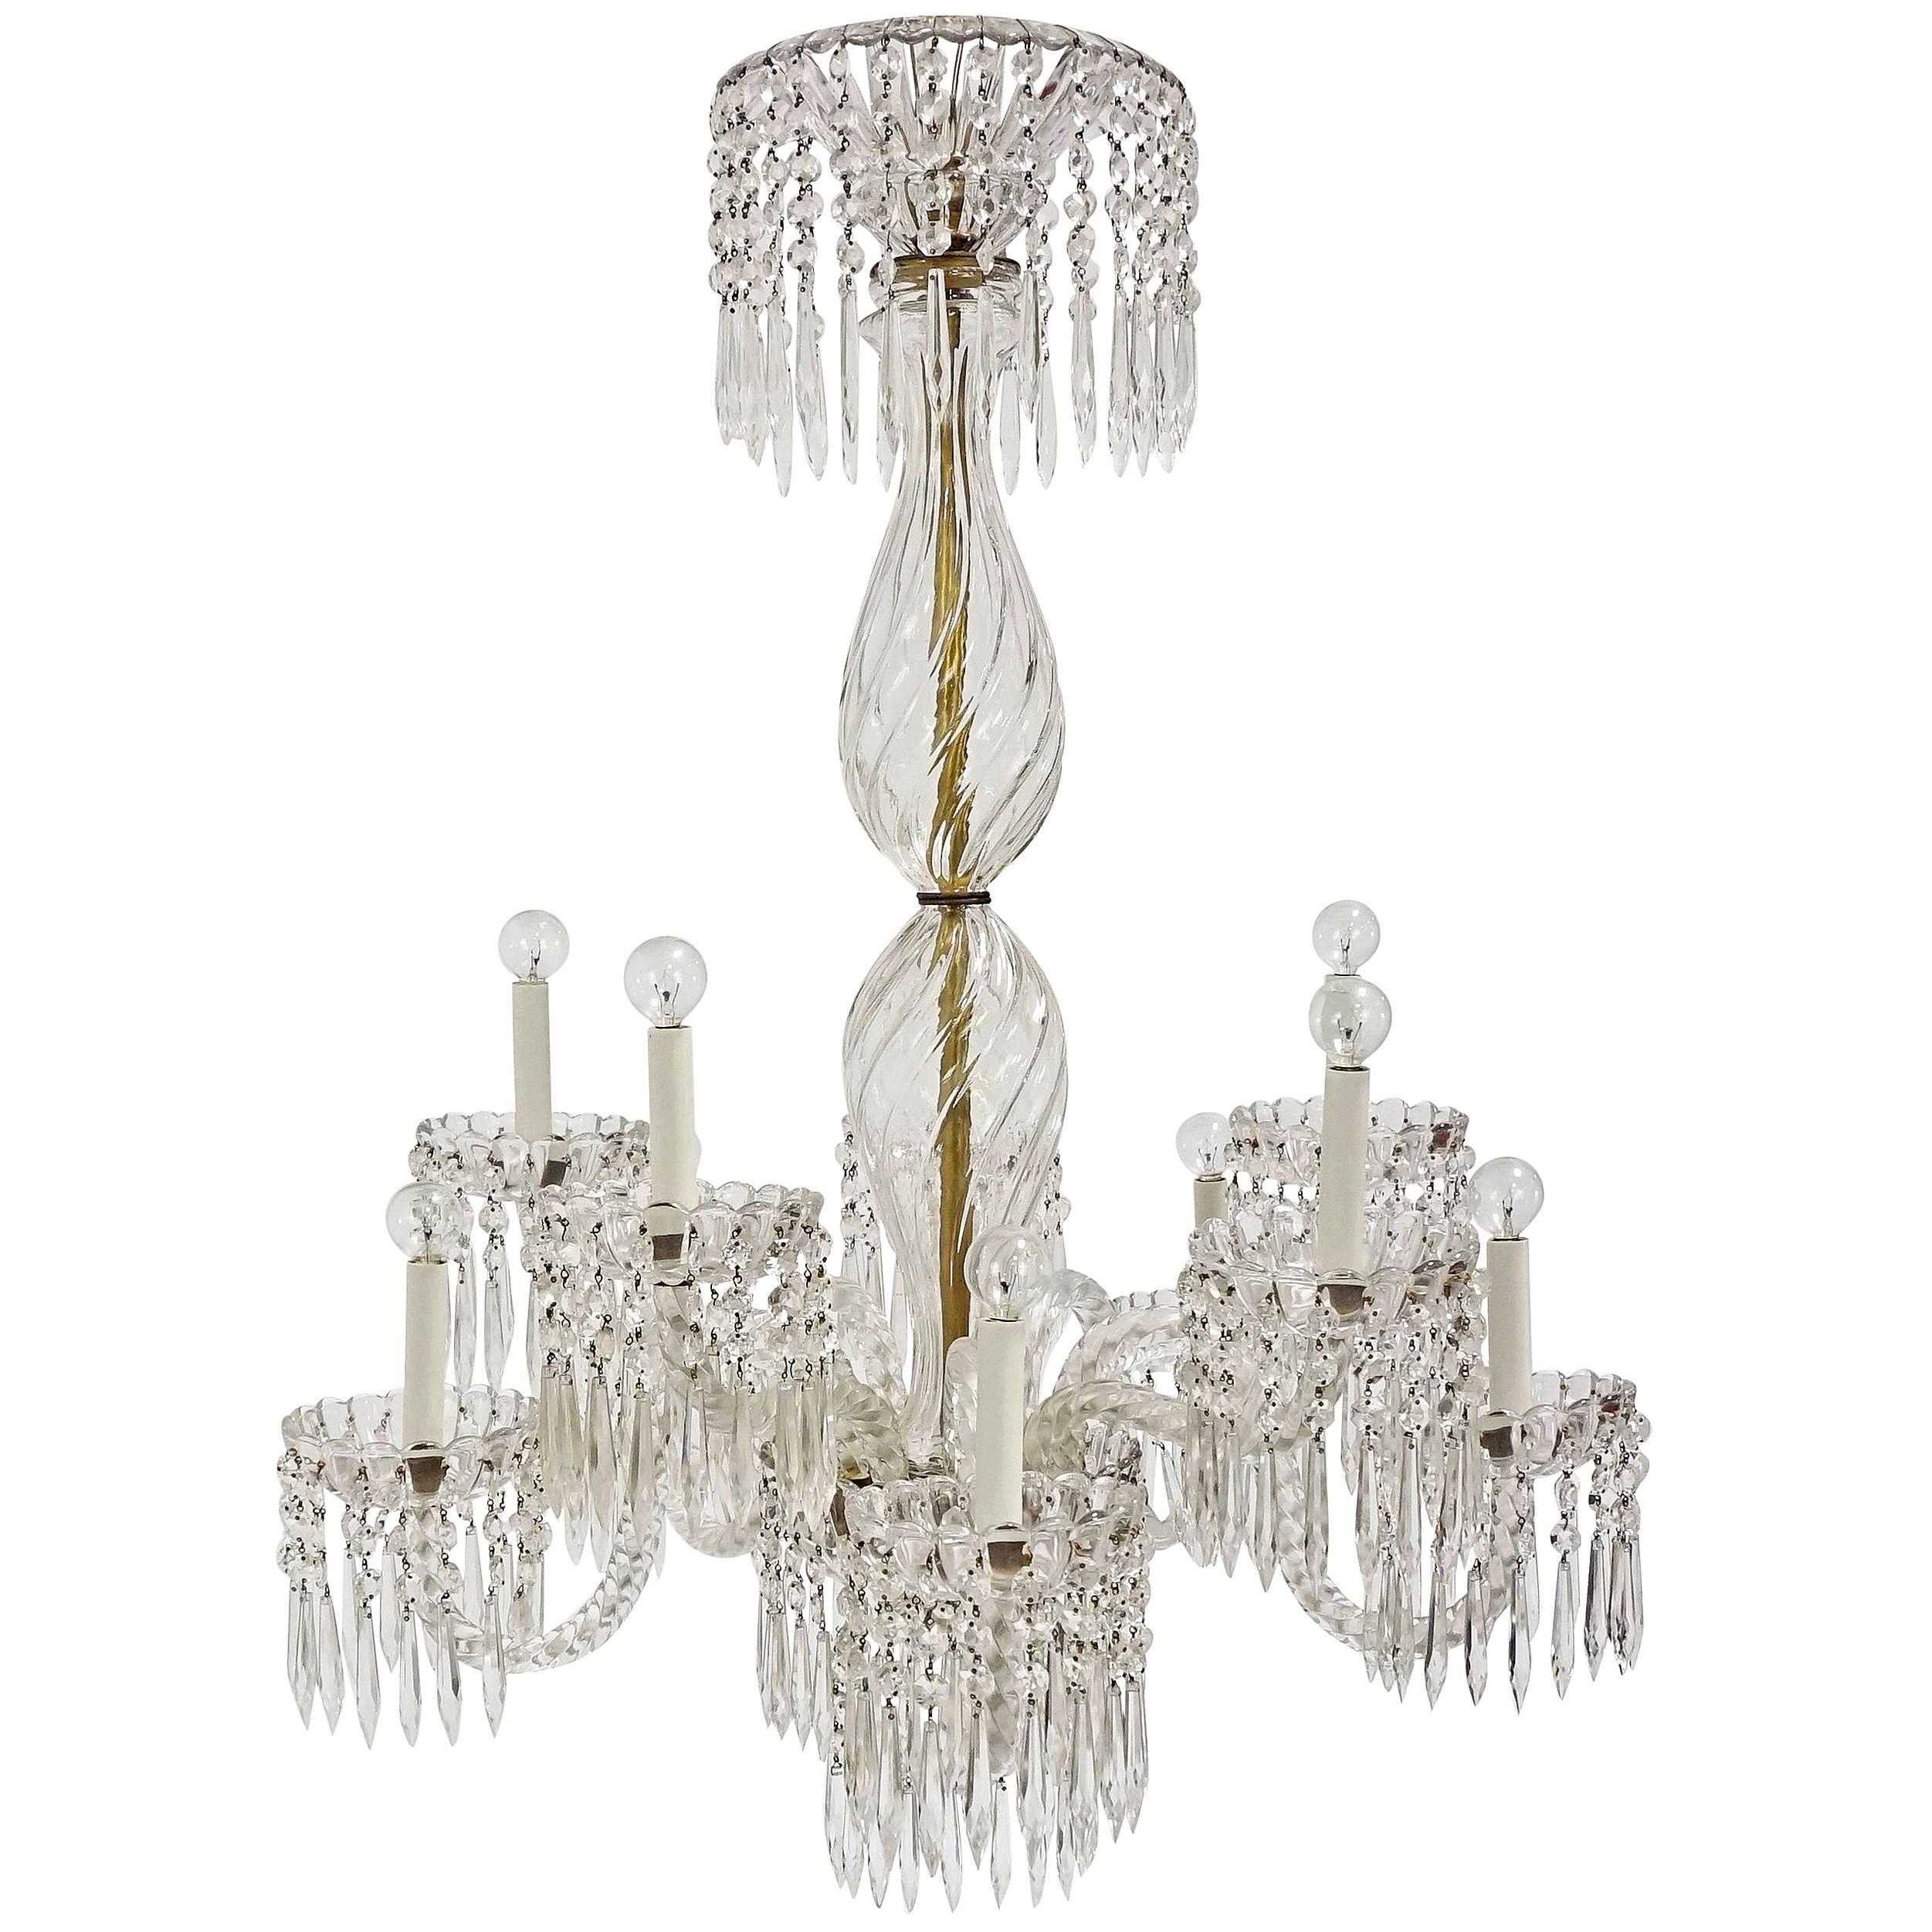 Antique Baccarat Undulating 10-Armed Crystal Waterfalls Chandelier